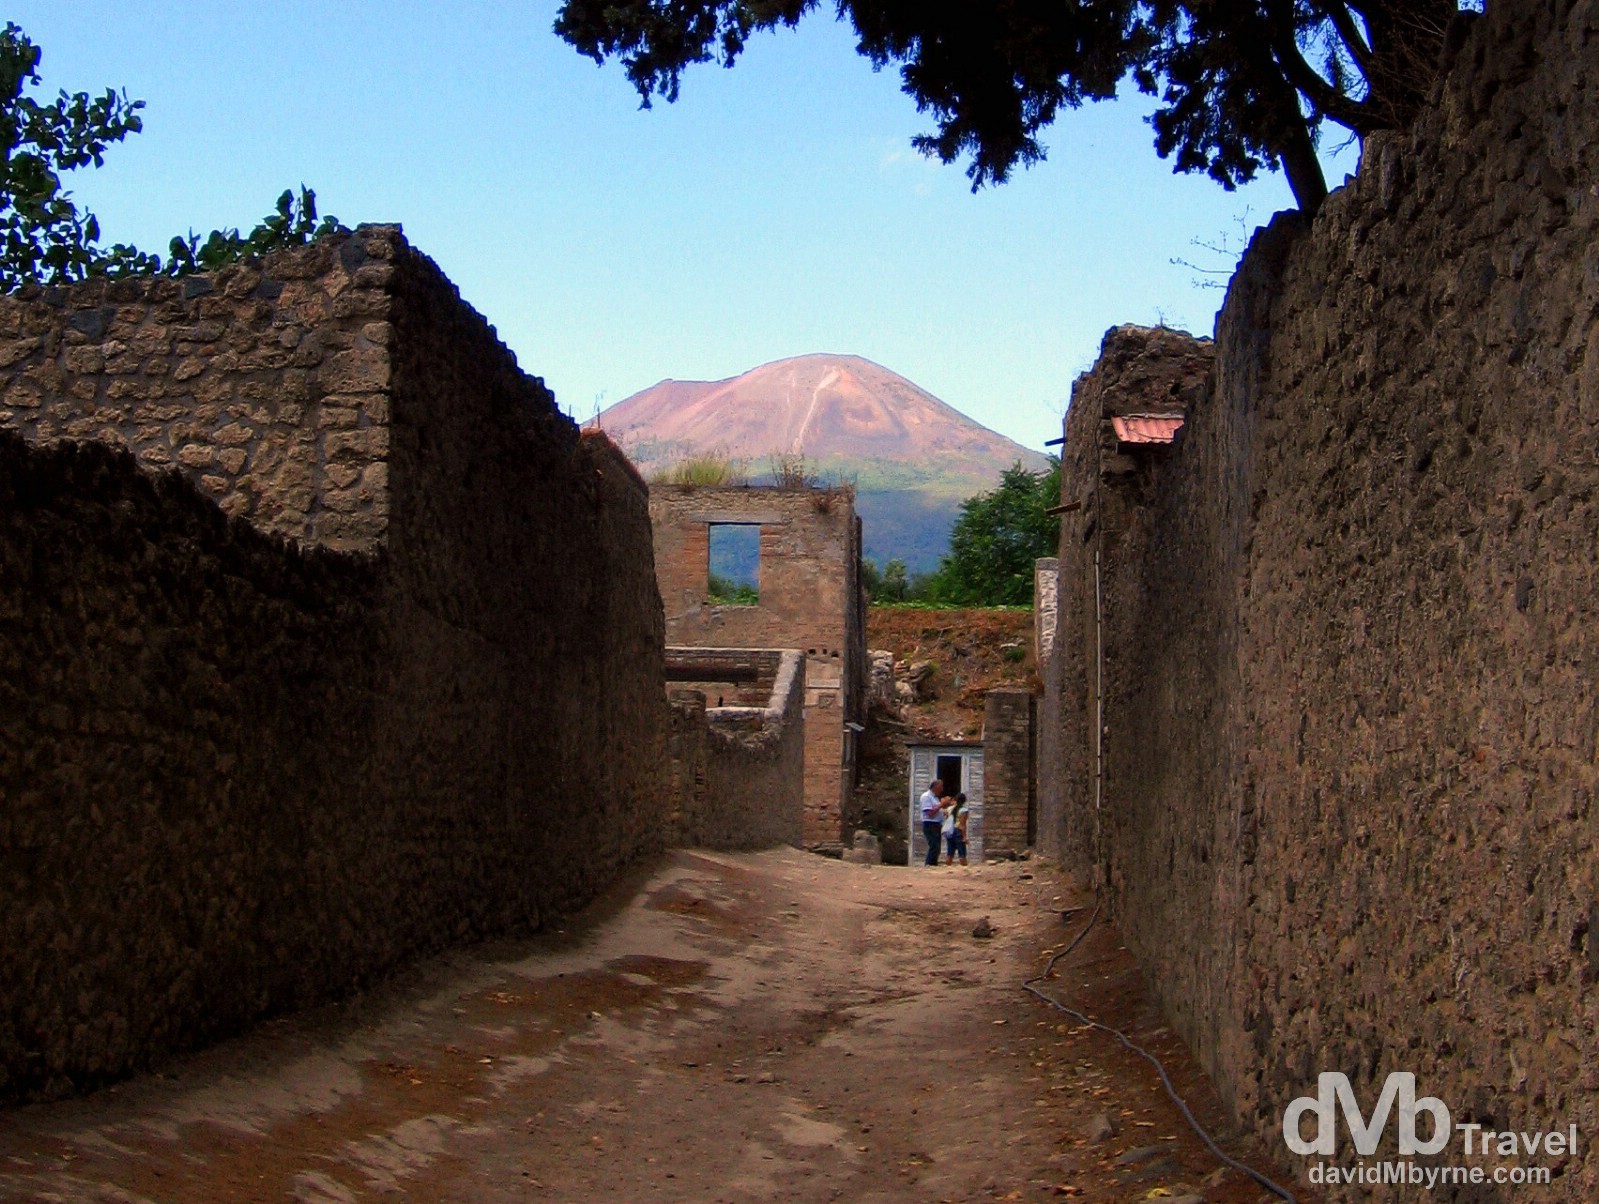 Mt. Vesuvius as seen from the streets of Pompeii, Campania, Italy. September 5th, 2007.